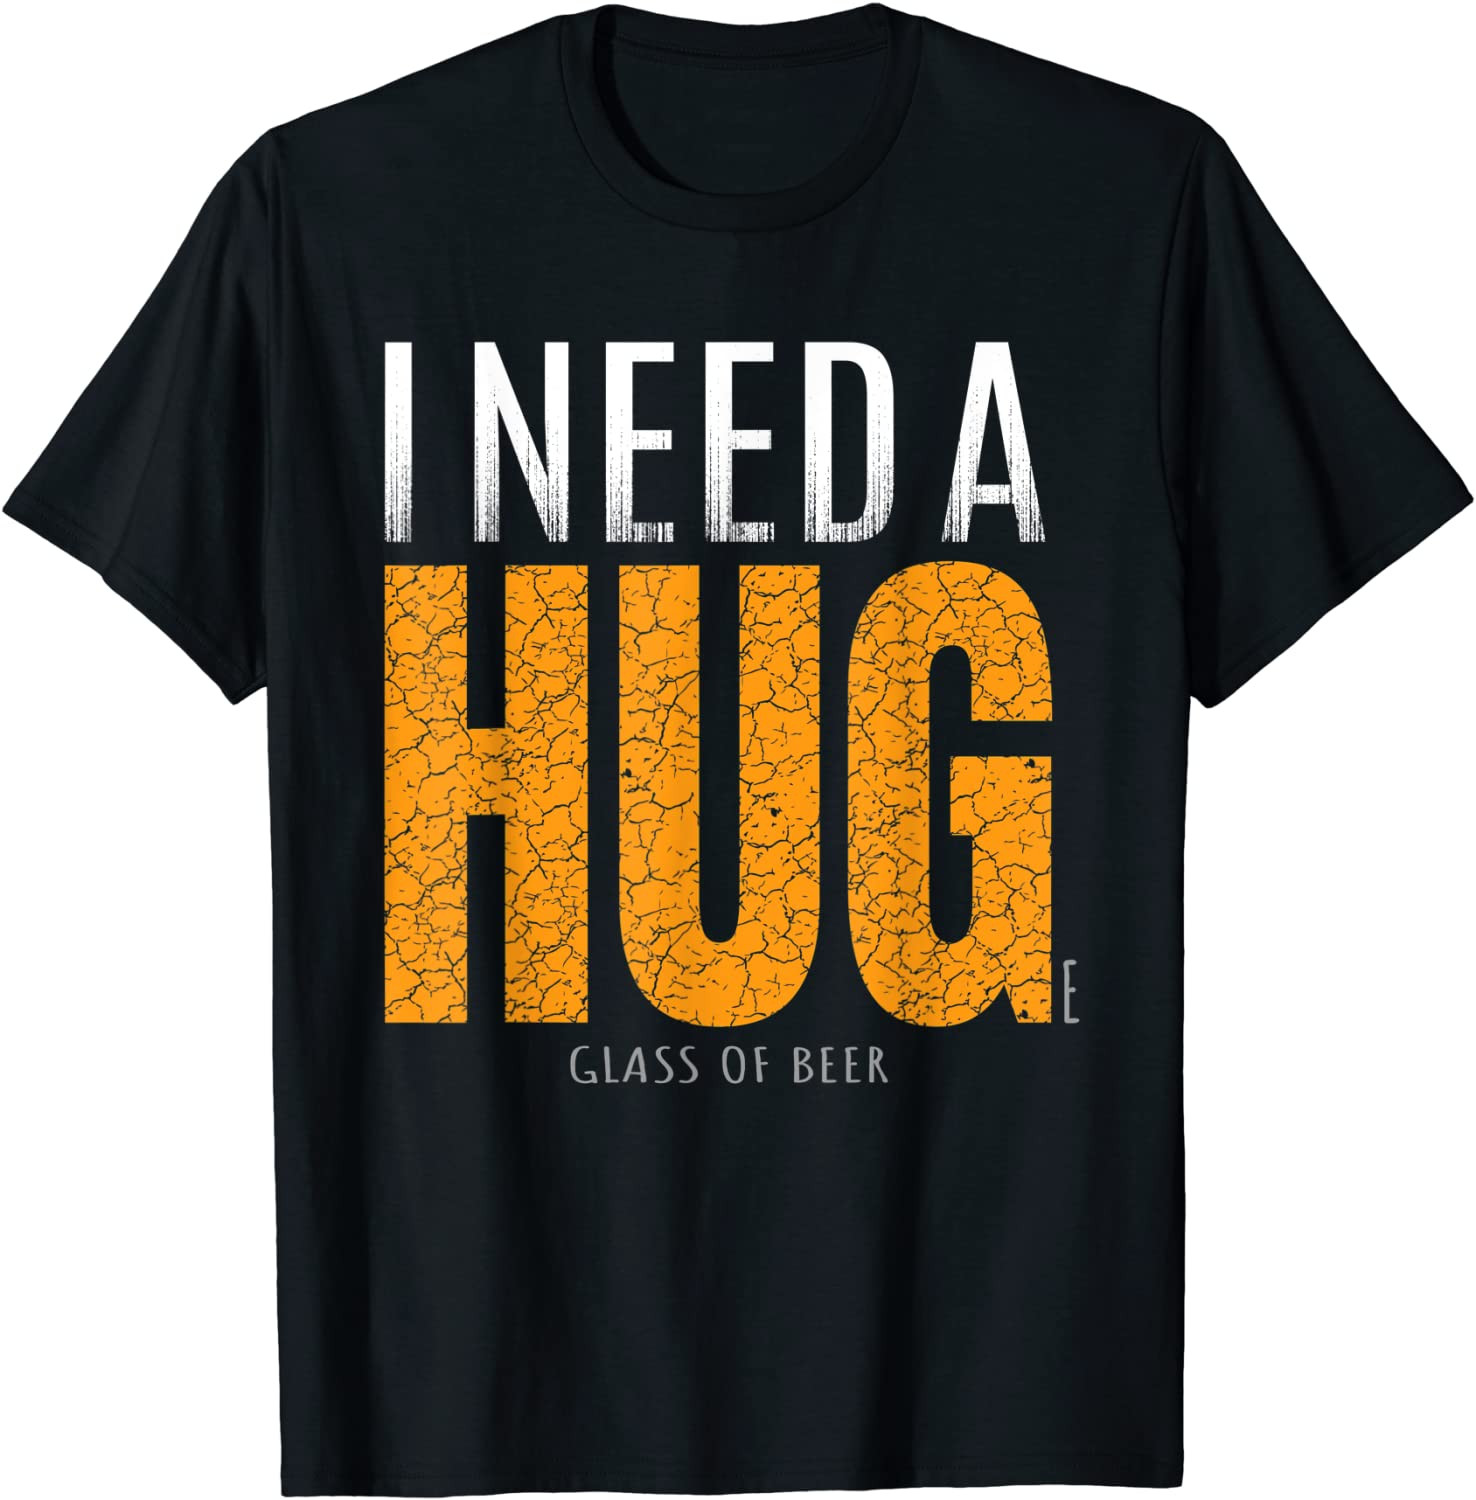 I Need A Huge Glass Of Beer T-Shirt